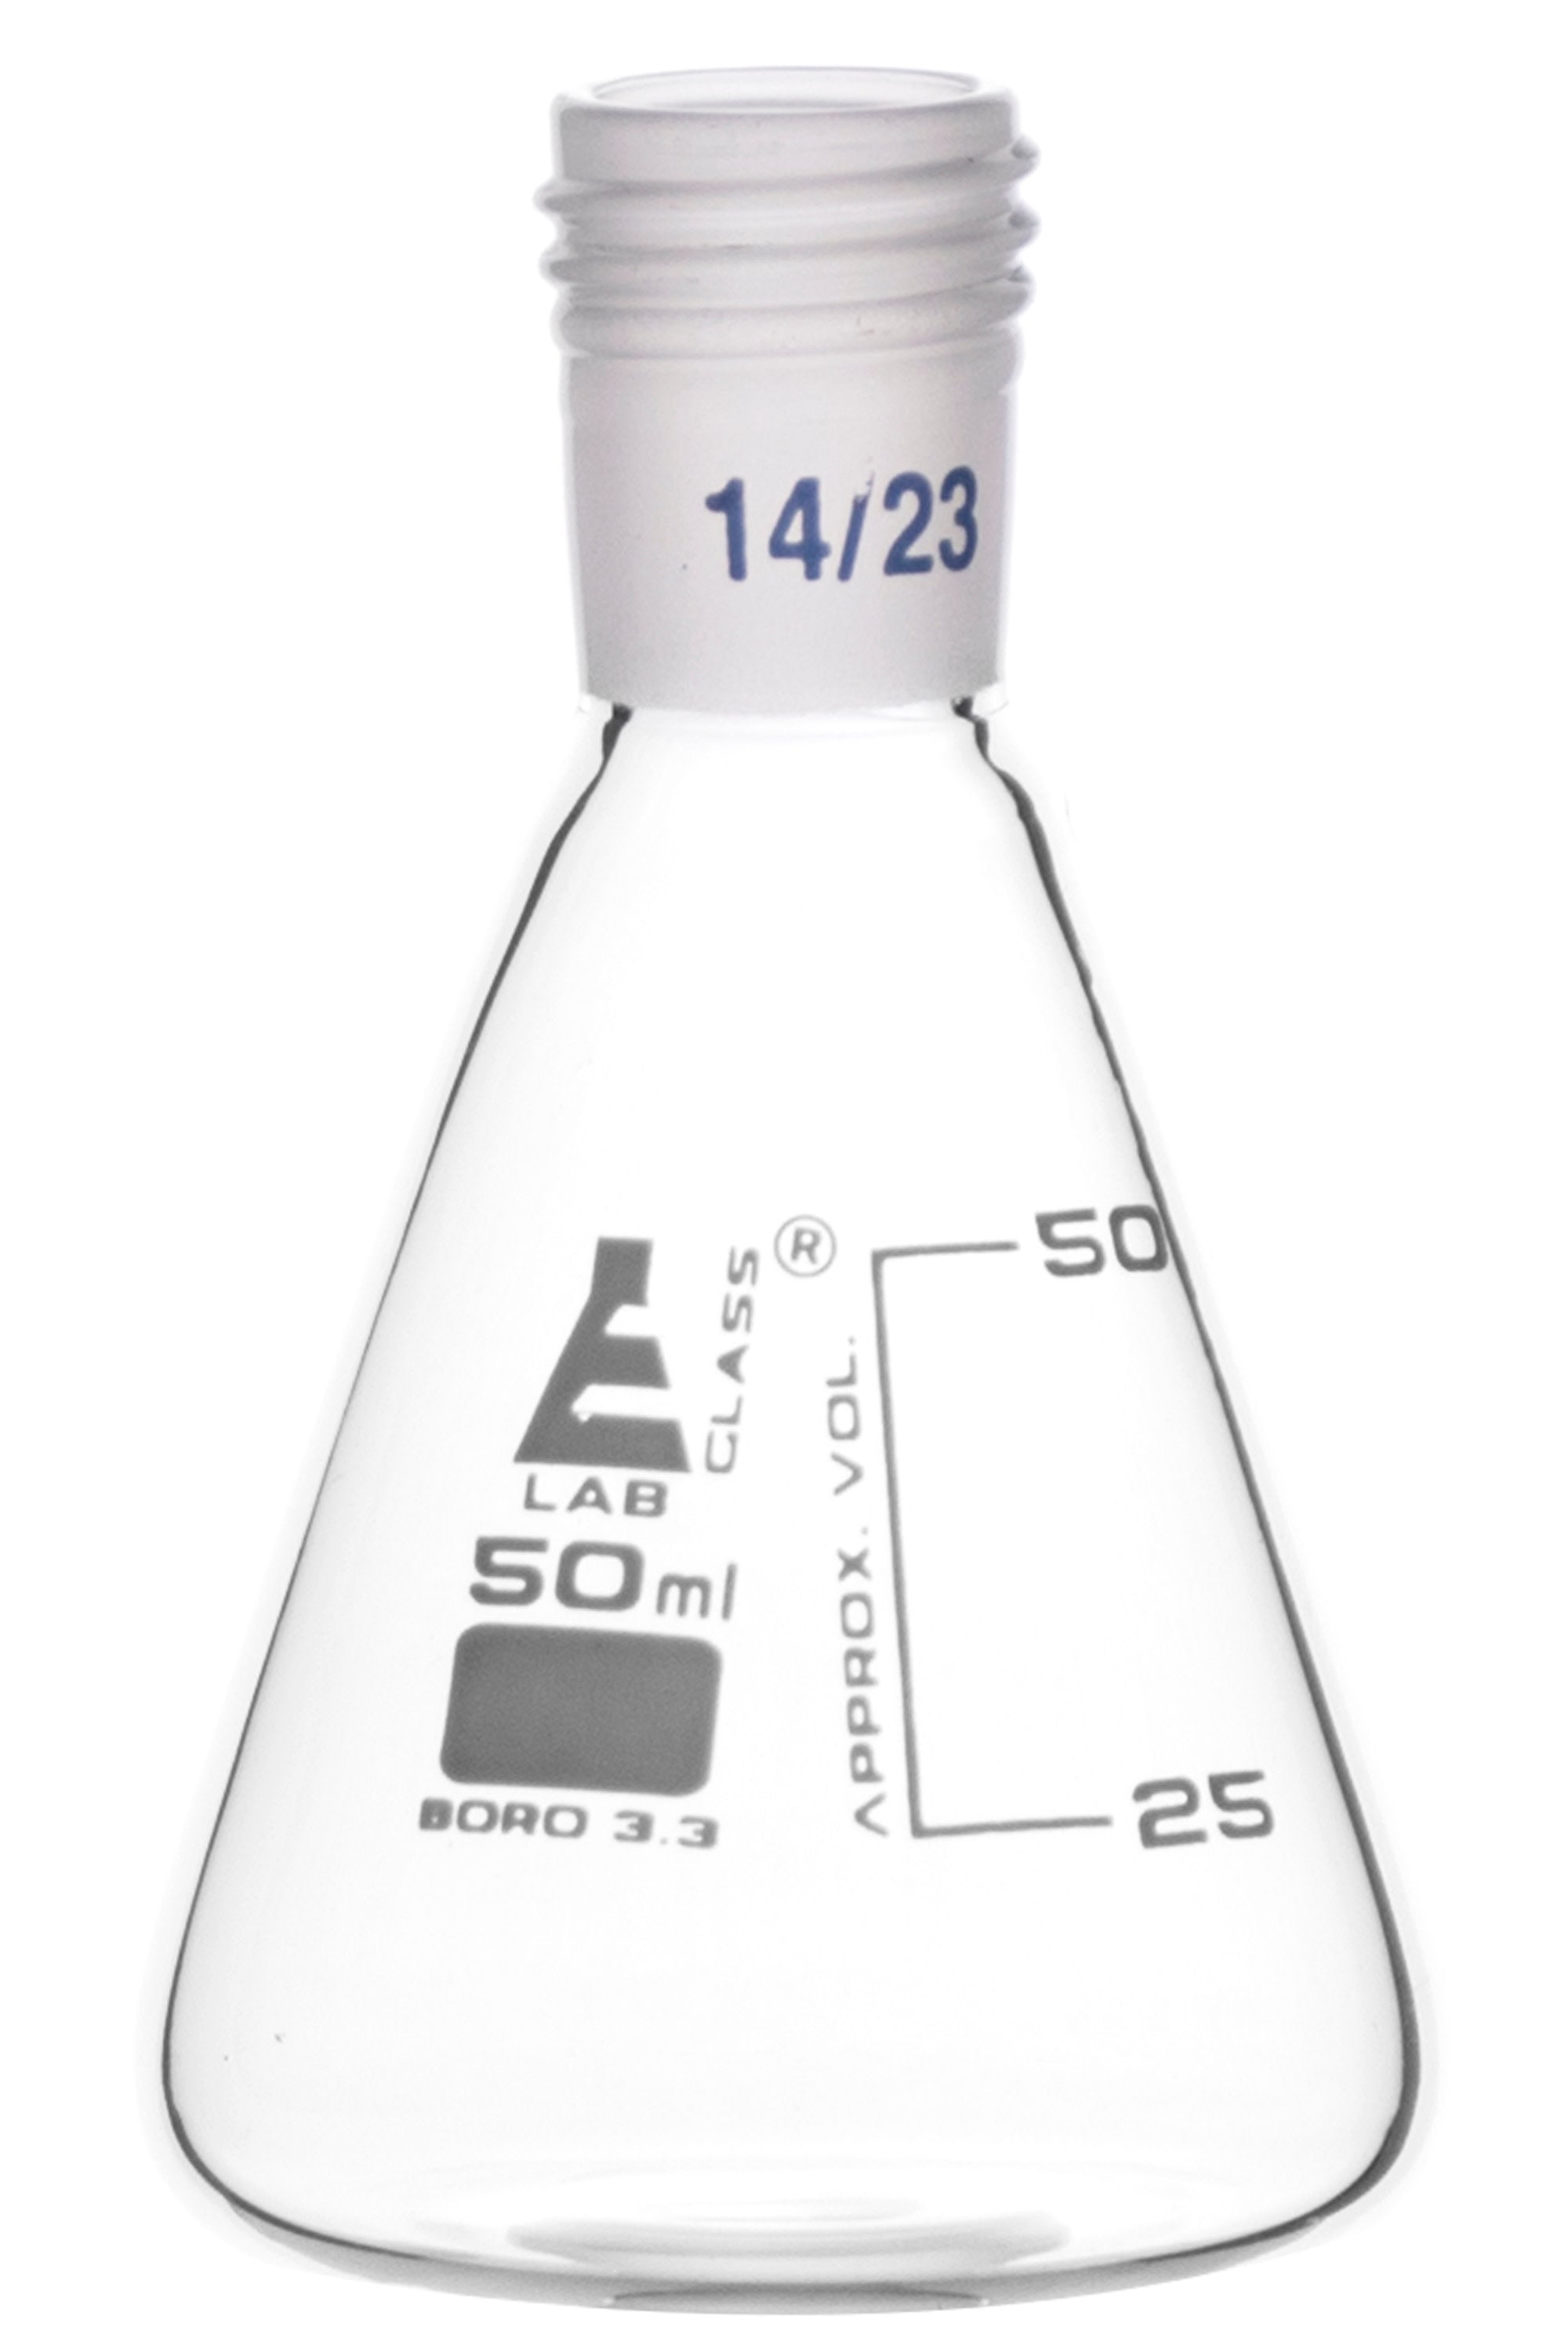 Borosilicate Glass Erlenmeyer Flask with 14/23 Screw Thread Neck Joint, 50 ml, 25 ml Graduations, Autoclavable